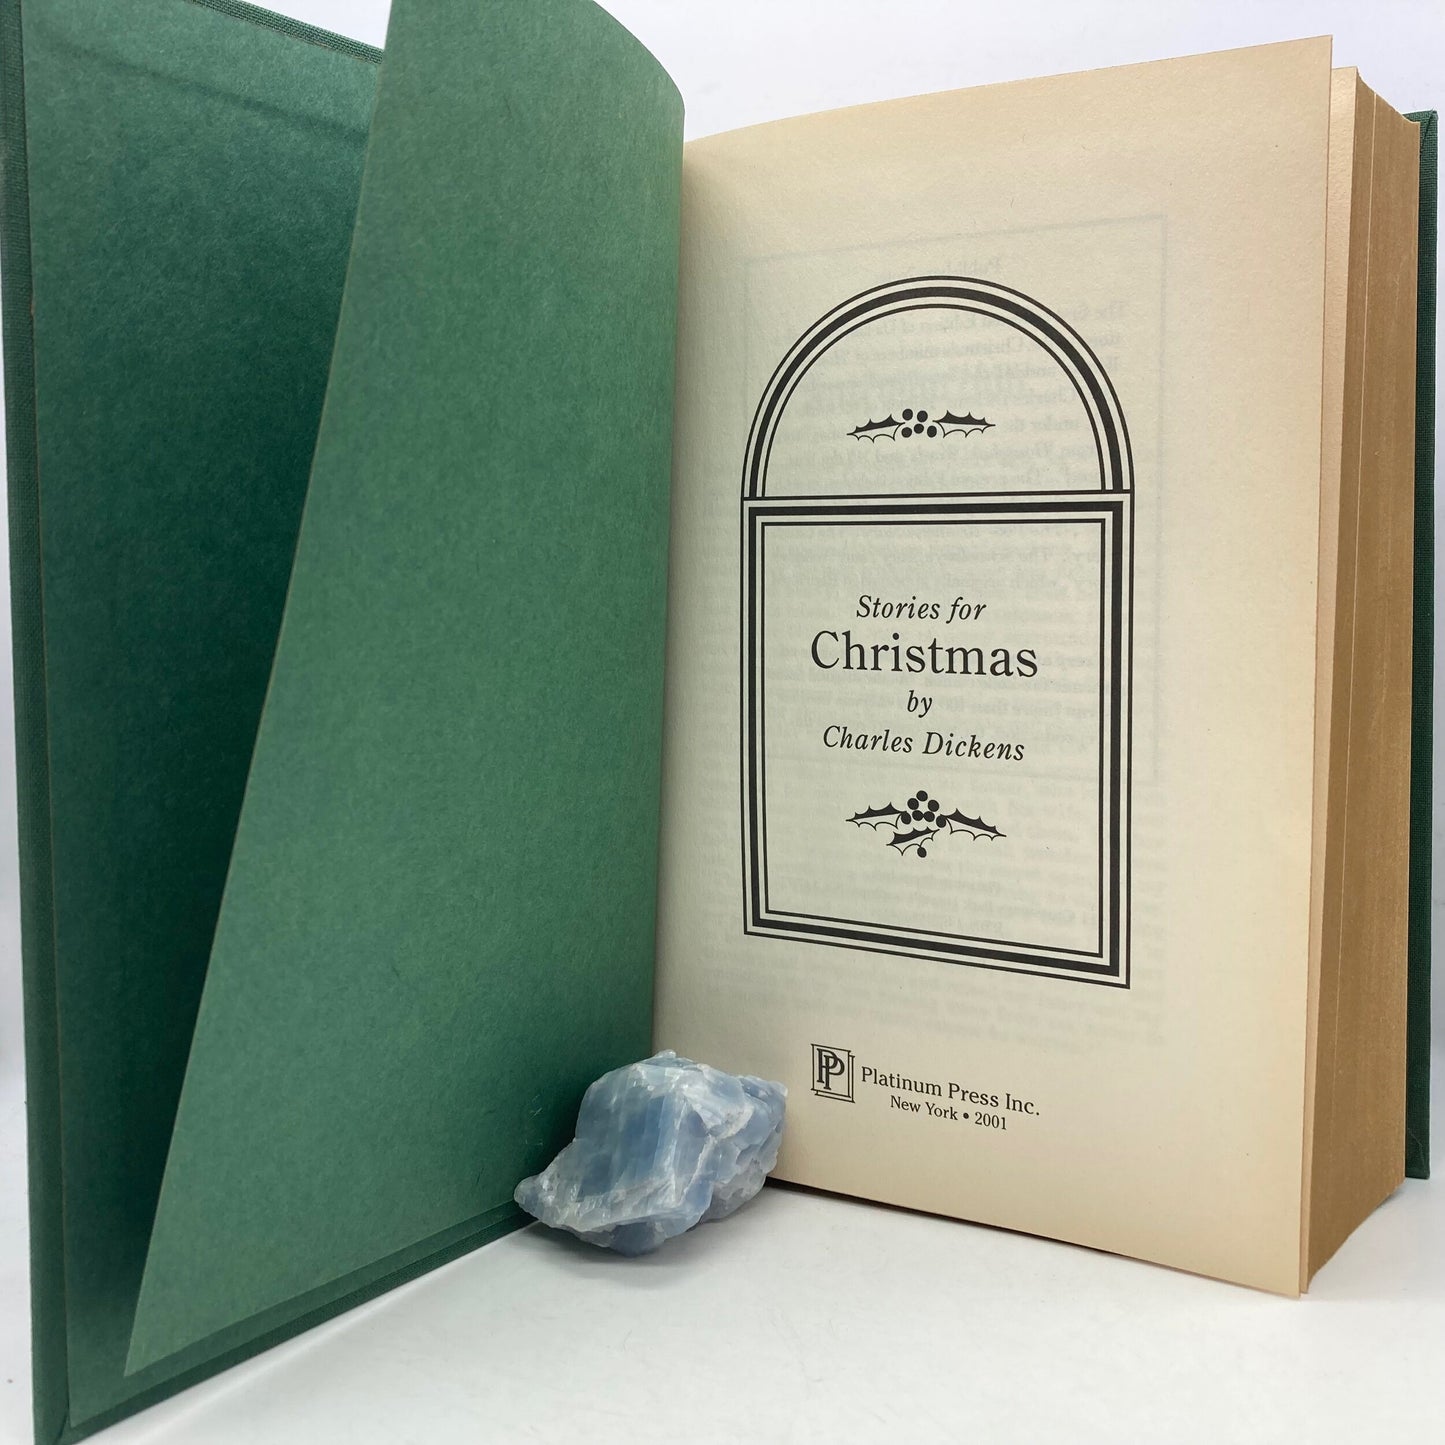 DICKENS, Charles "Stories for Christmas"[Platinum Press Inc, 2001] - Buzz Bookstore